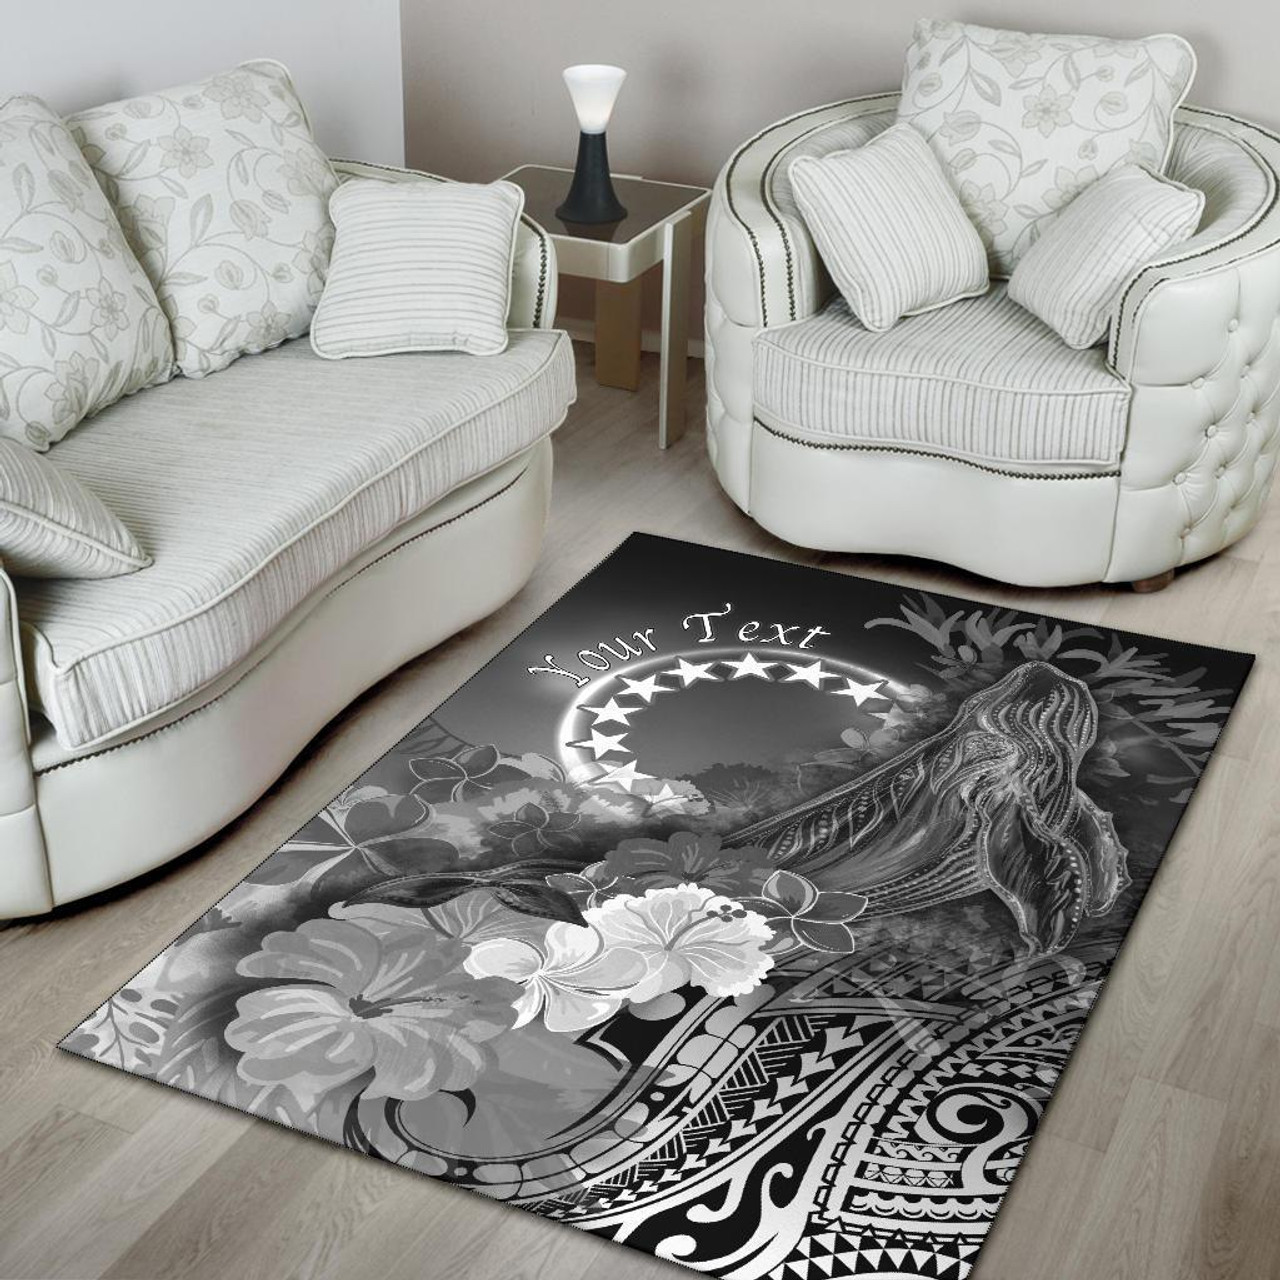 Cook Islands Custom Personalised Area Rug - Humpback Whale with Tropical Flowers (White) Polynesian 4